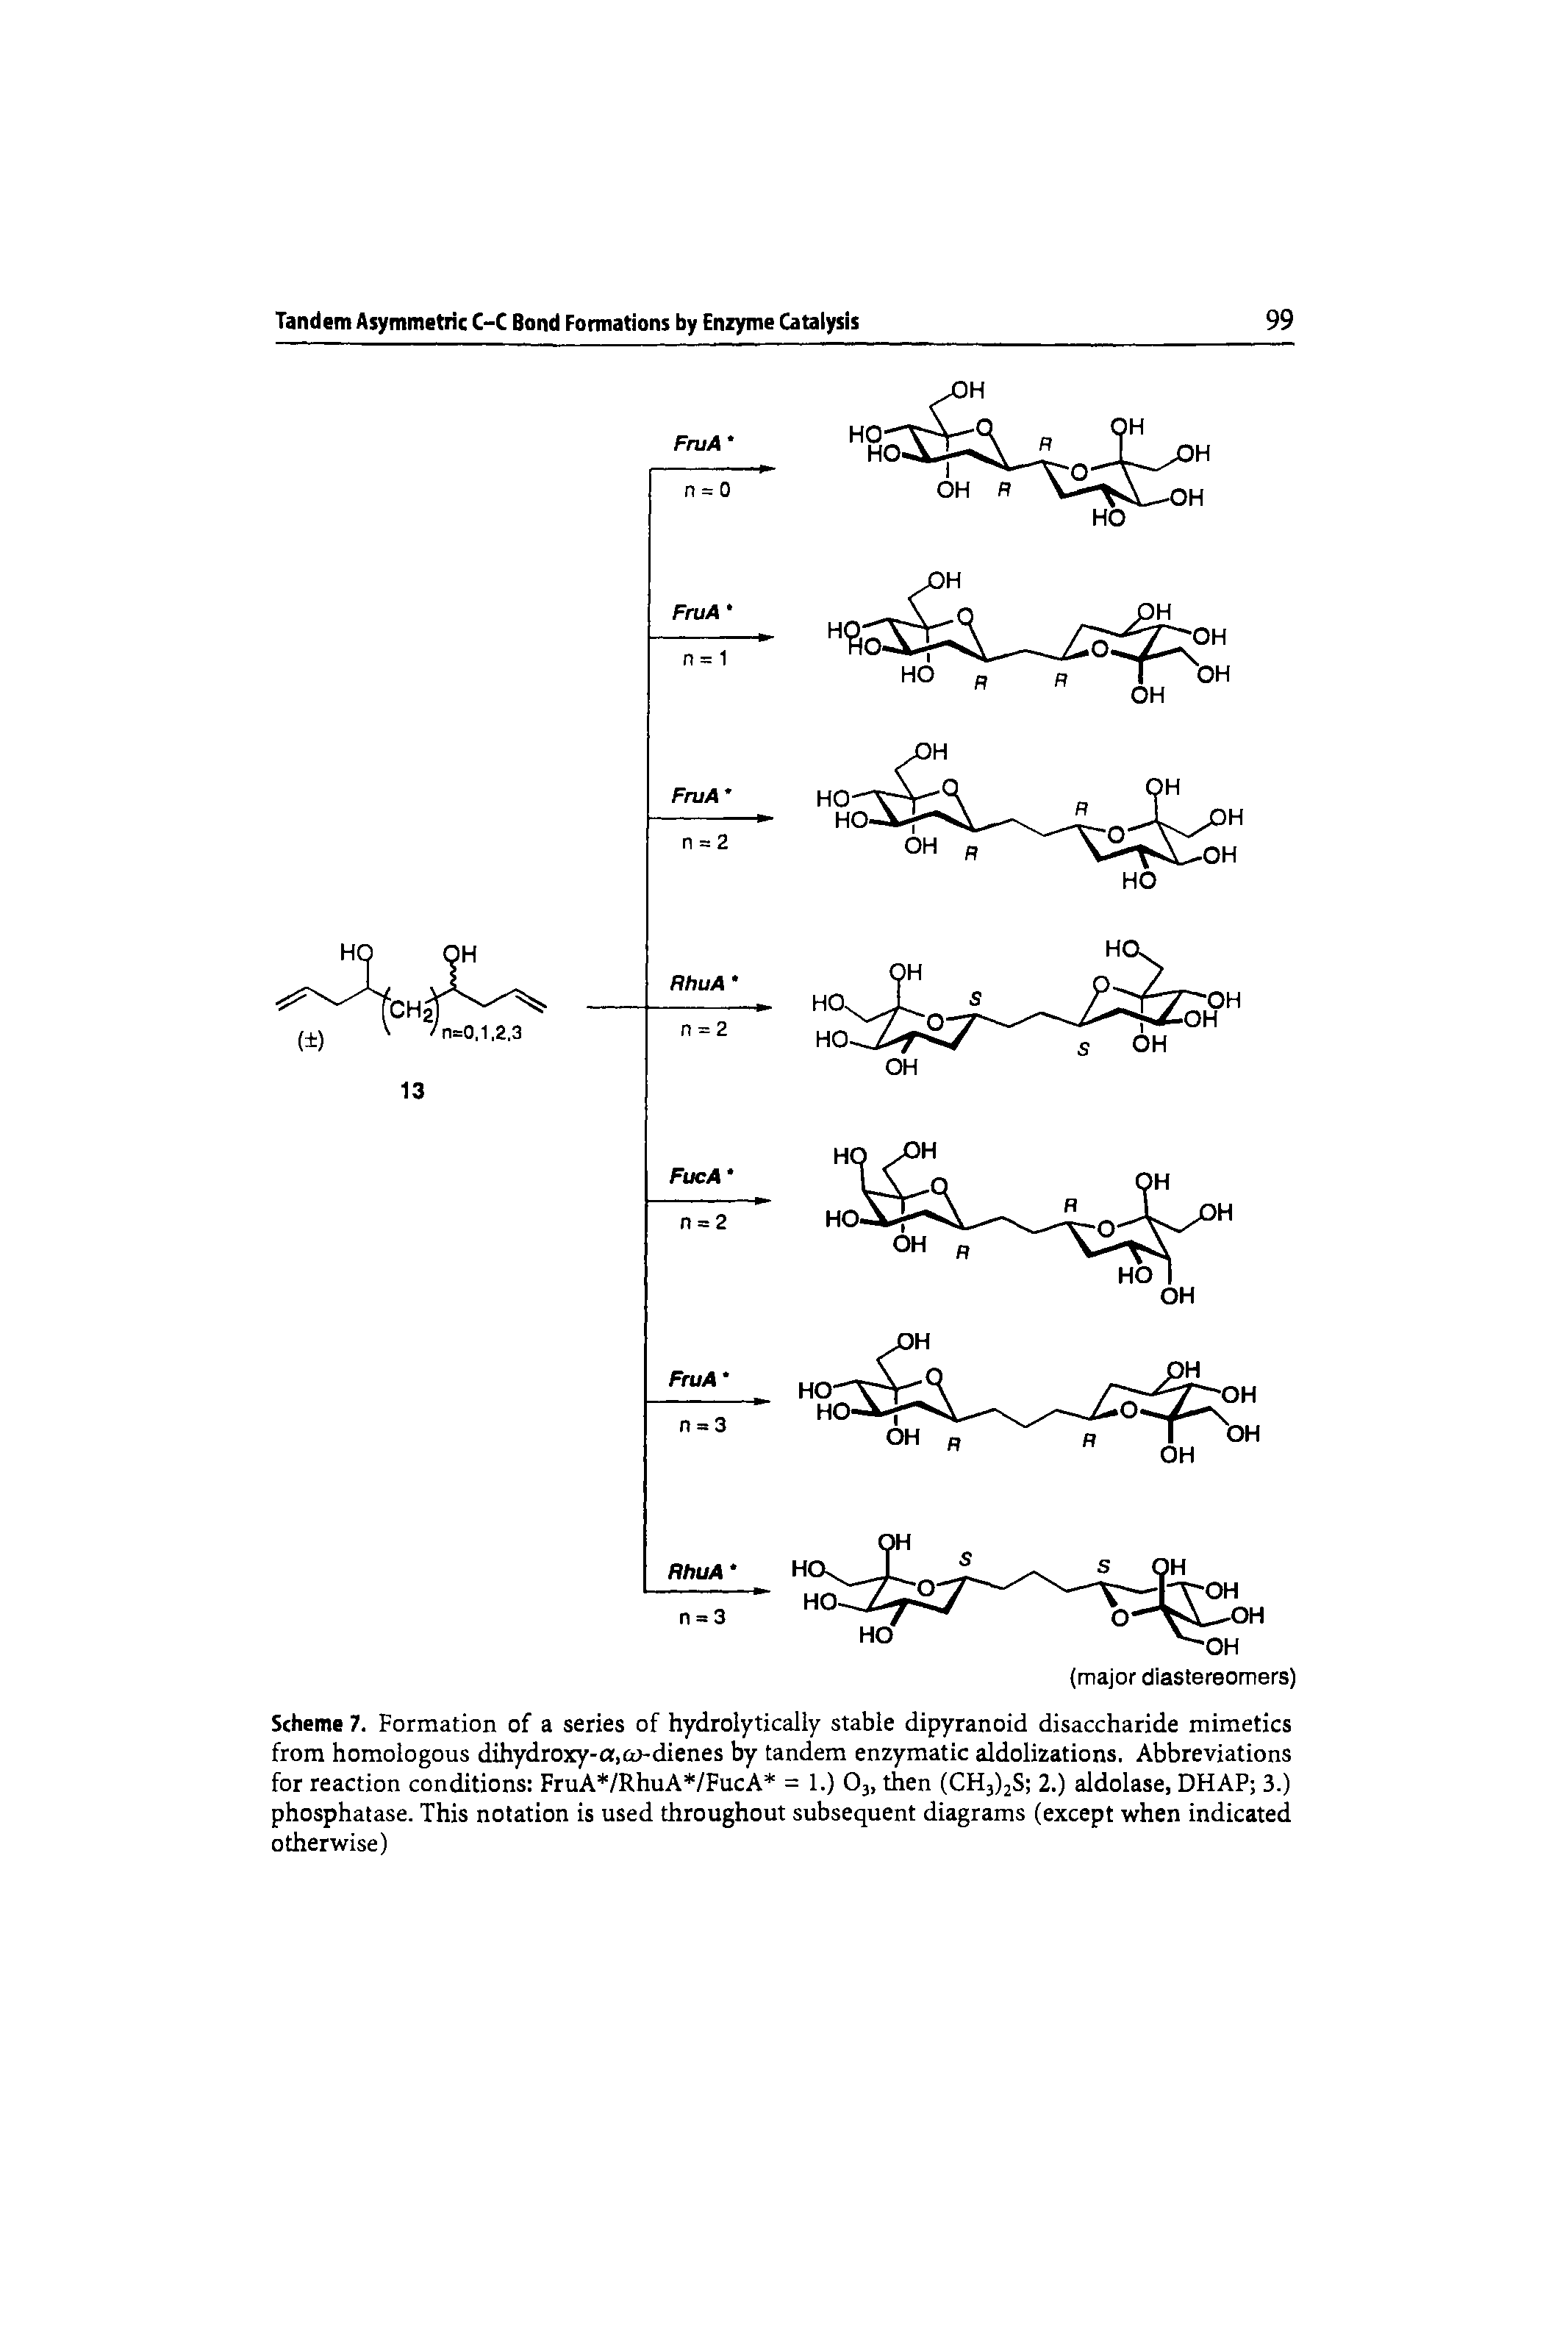 Scheme 7. Formation of a series of hydrolytically stable dipyranoid disaccharide mimetics from homologous dihydroxy- ,ta-dienes by tandem enzymatic aldolizations. Abbreviations for reaction conditions FruA /RhuA /FucA = 1.) O3, then (CHjljS 2.) aldolase, DHAP 3.) phosphatase. This notation is used throughout subsequent diagrams (except when indicated otherwise)...